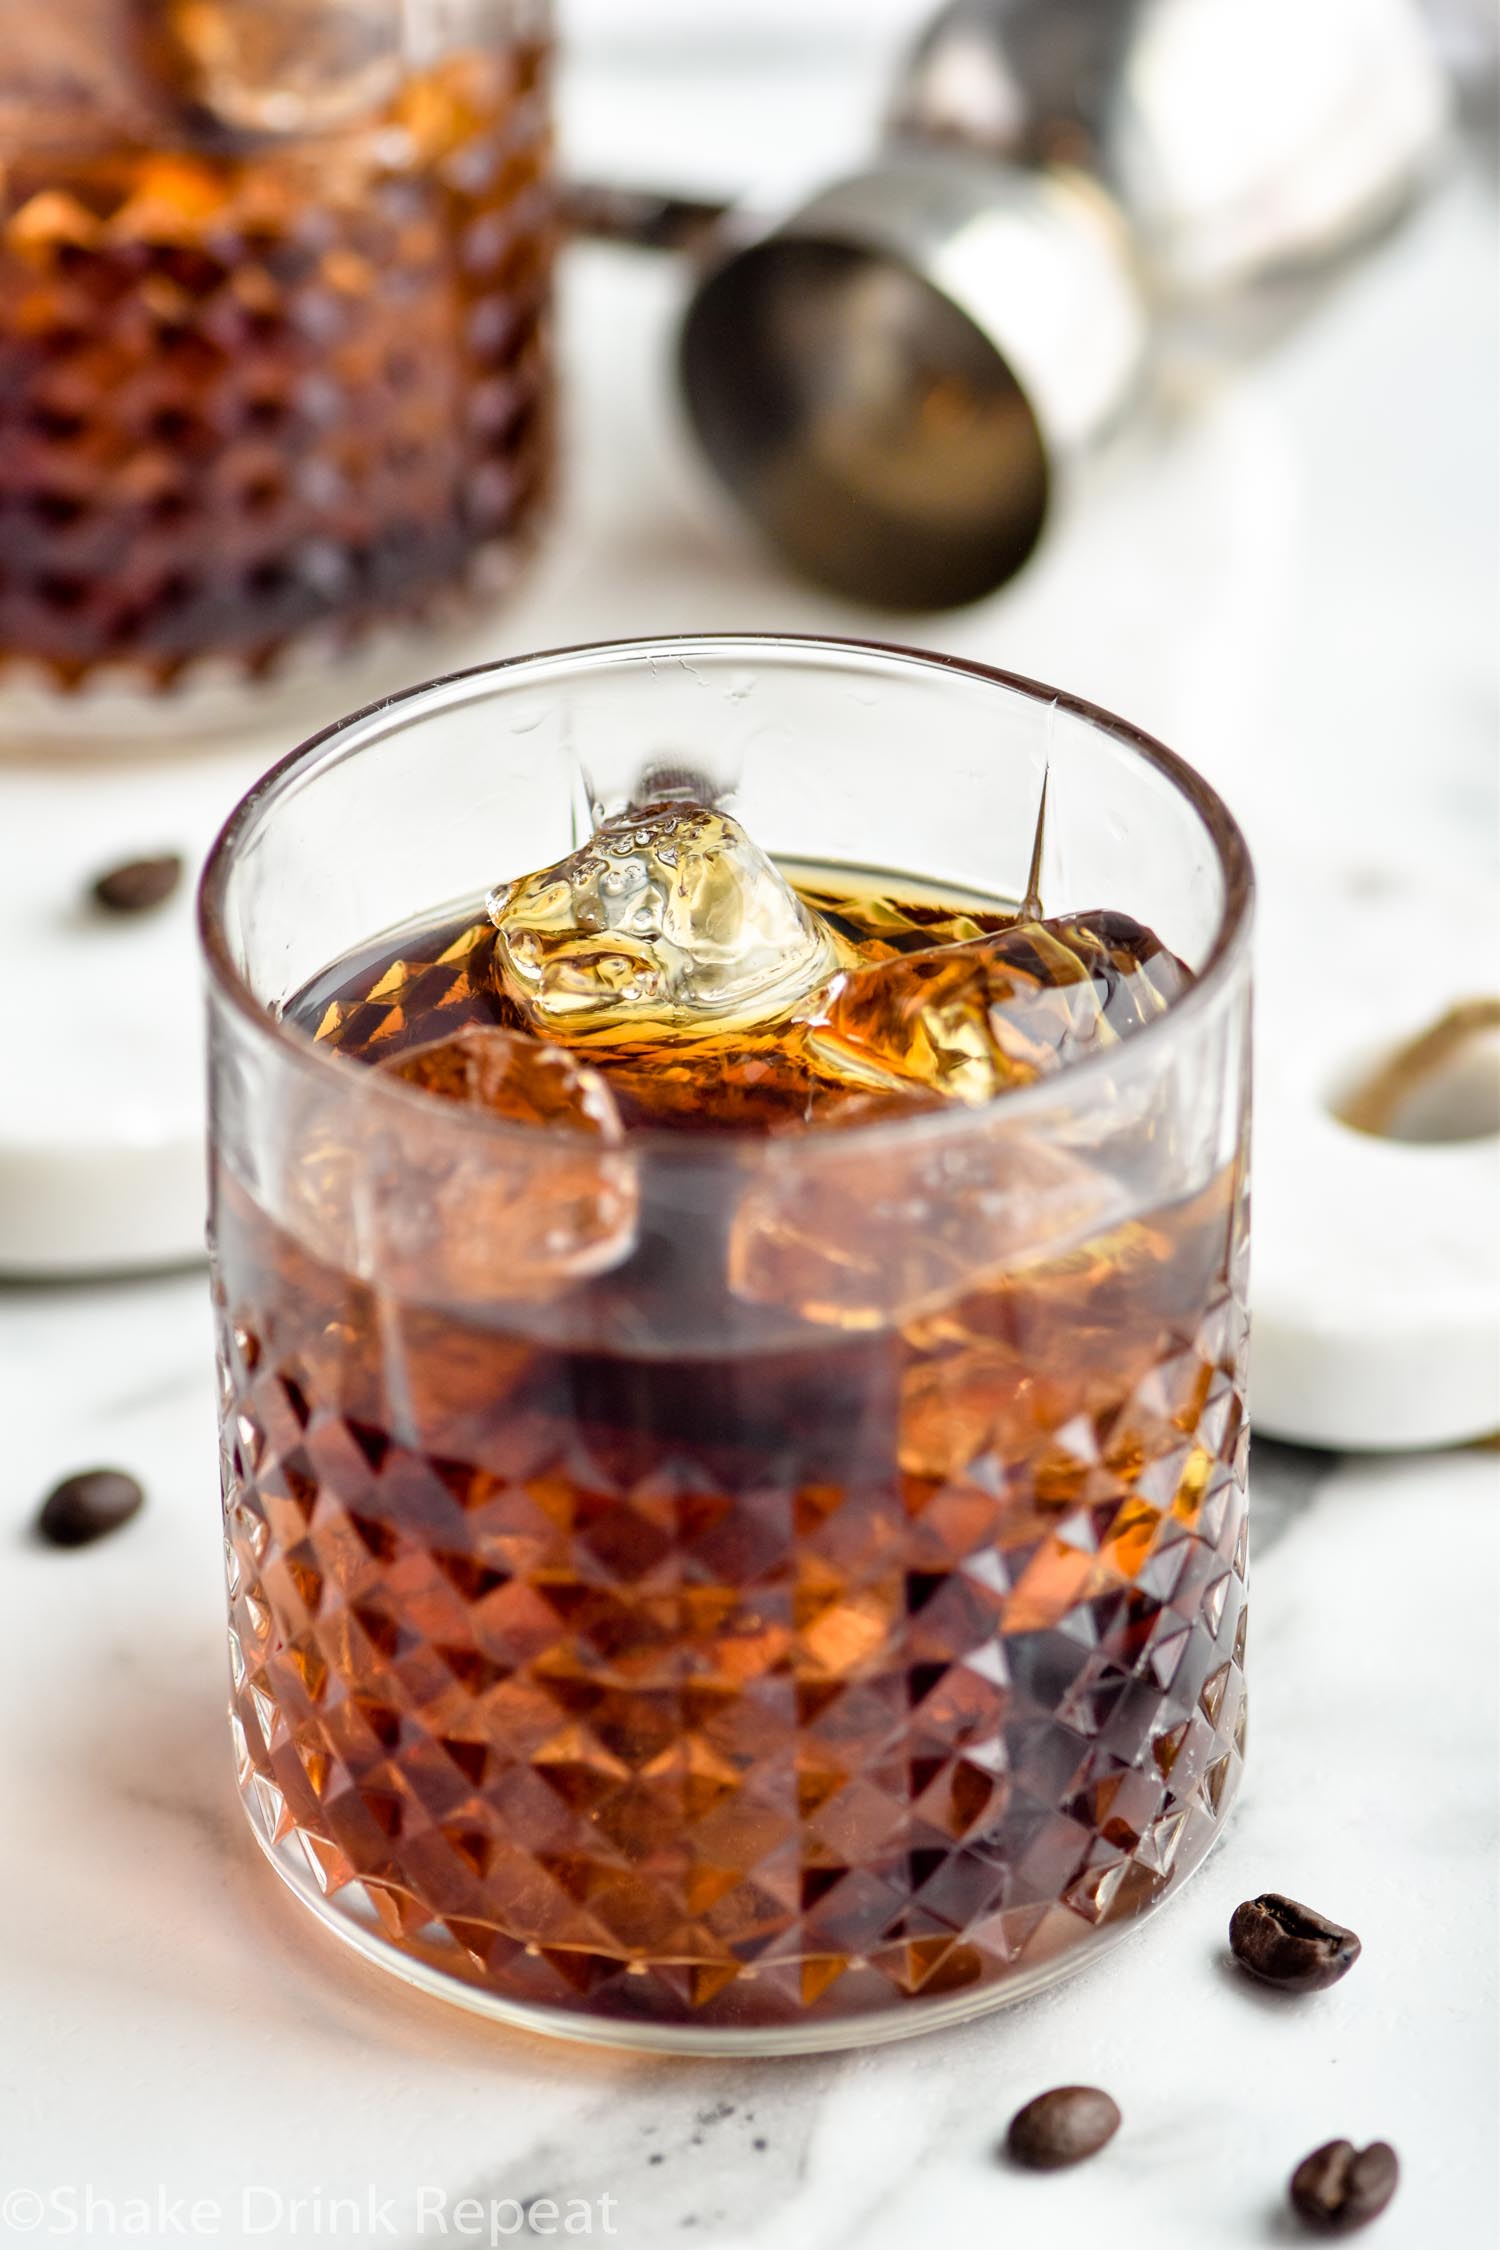 Two glasses of Black Russian with ice, surrounded by coffee beans and a jigger off to the side